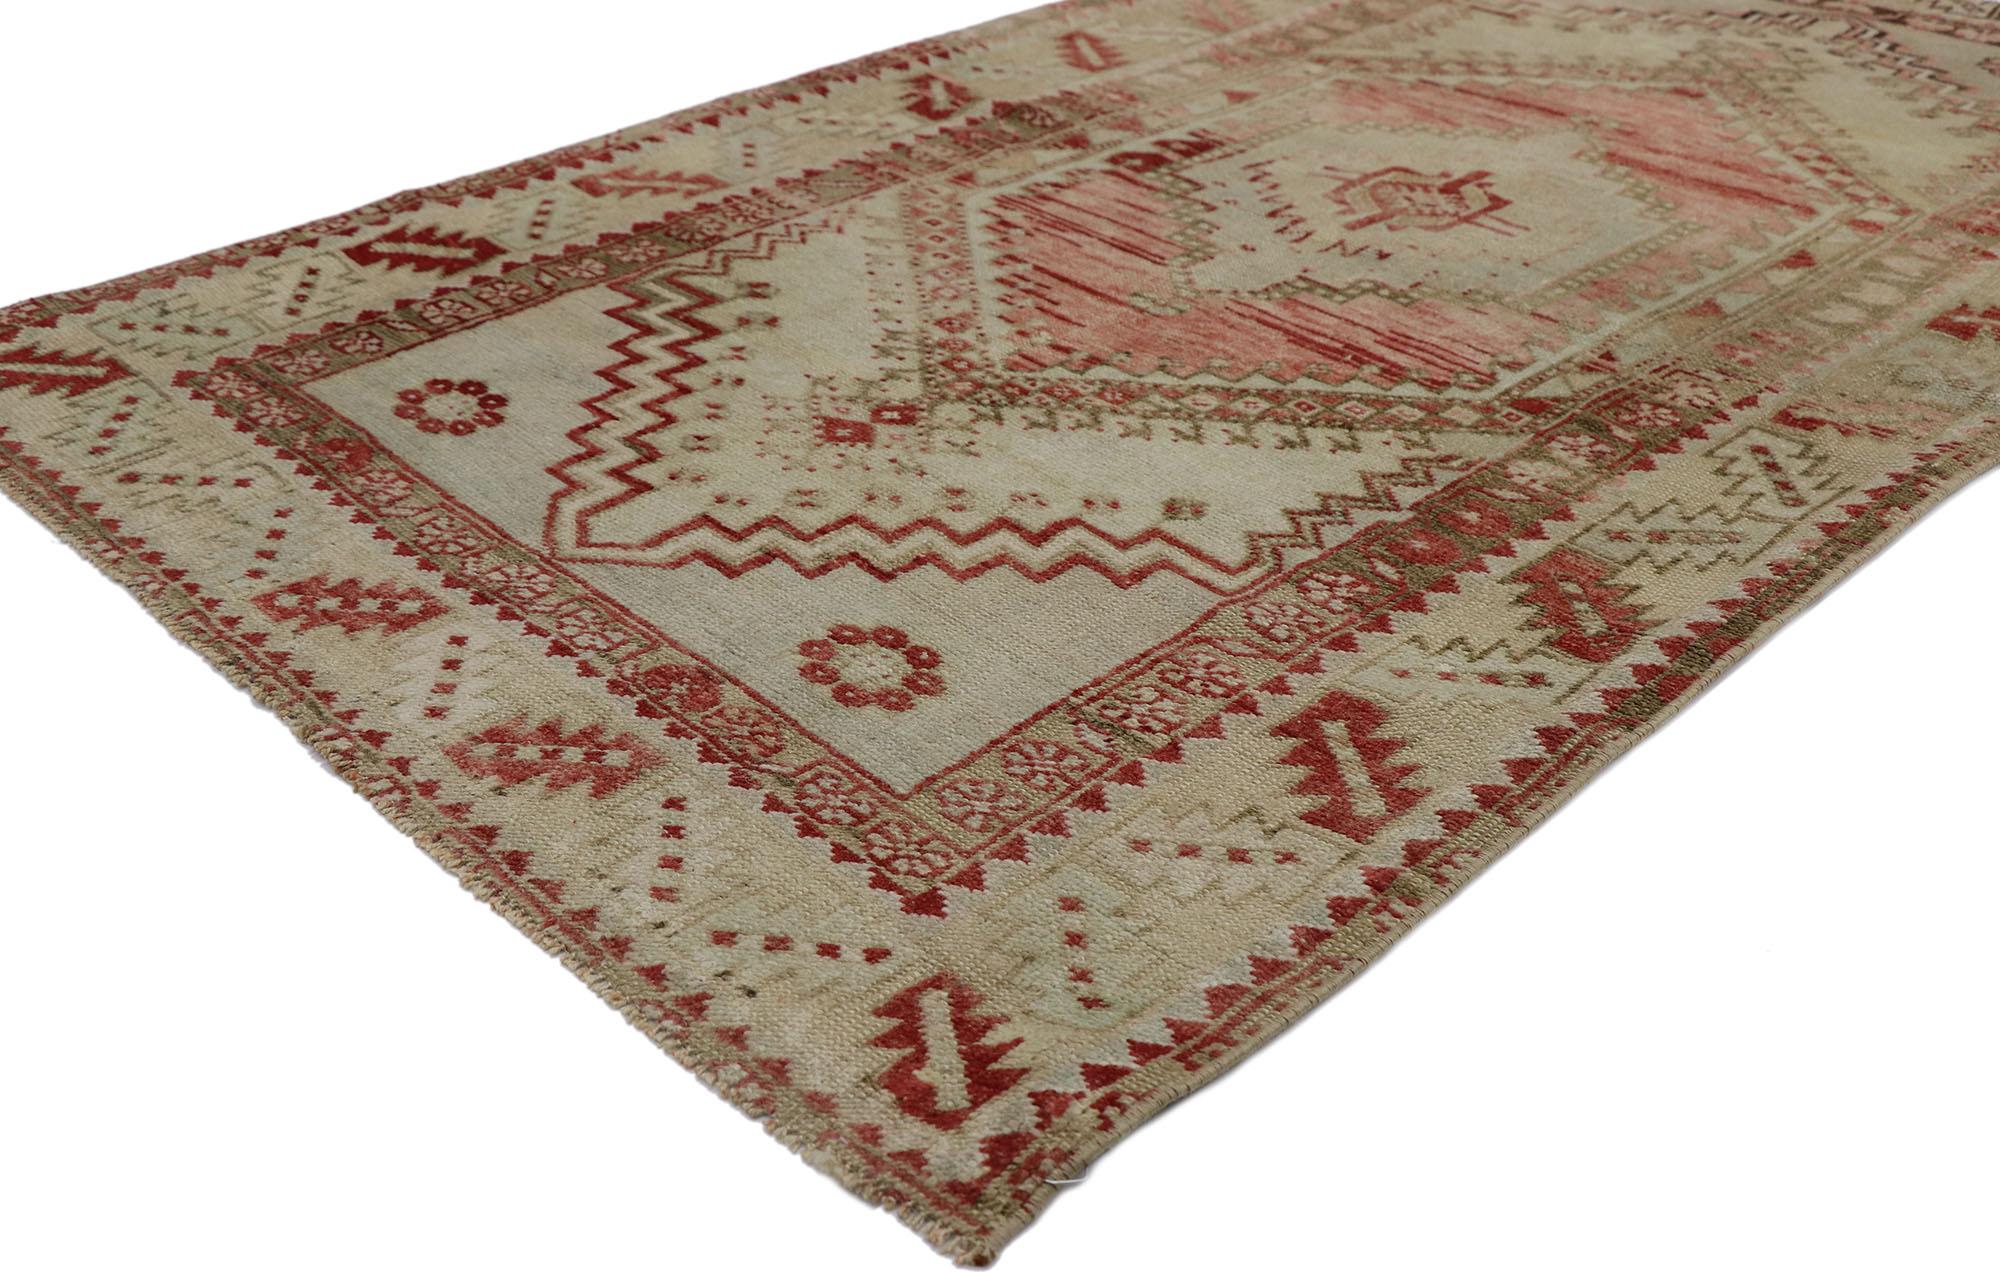 53571 Vintage Turkish Oushak rug 03'03 x 05'06. With its beguiling beauty and rustic sensibility, this hand-knotted wool vintage Turkish Oushak rug is immersed in Anatolian history. The abrashed cut-out field features a concentric stepped medallion